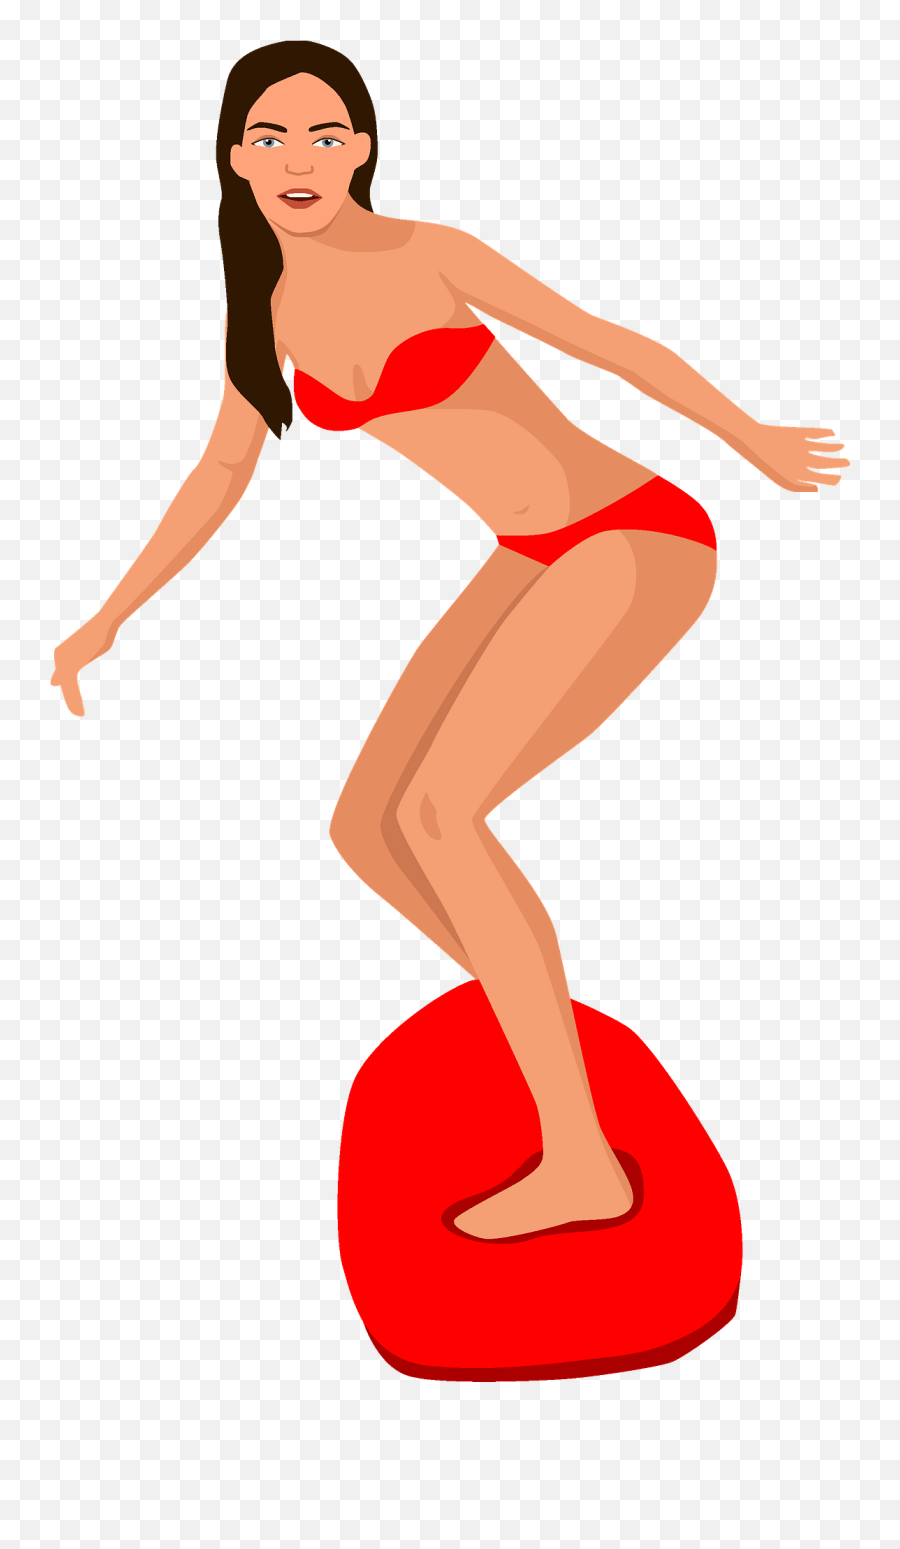 Surfing Girl Clipart Free Download Transparent Png Creazilla - Transparent Surfing Girl Clipart Emoji,Surfing Clipart